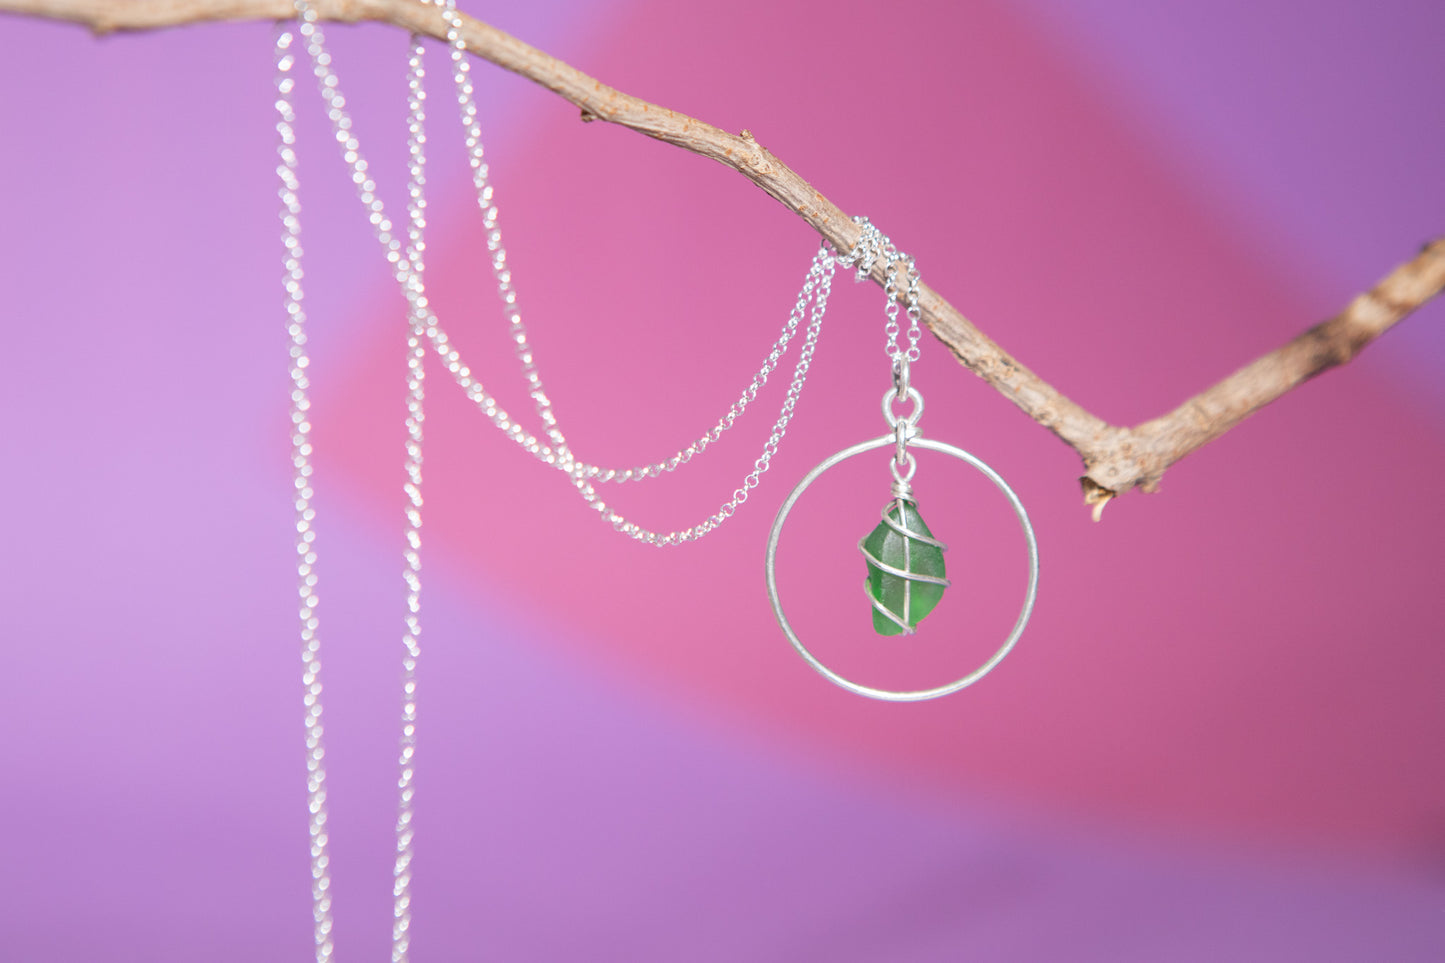 Jennie Hoop Necklace in Silver & Bright Green